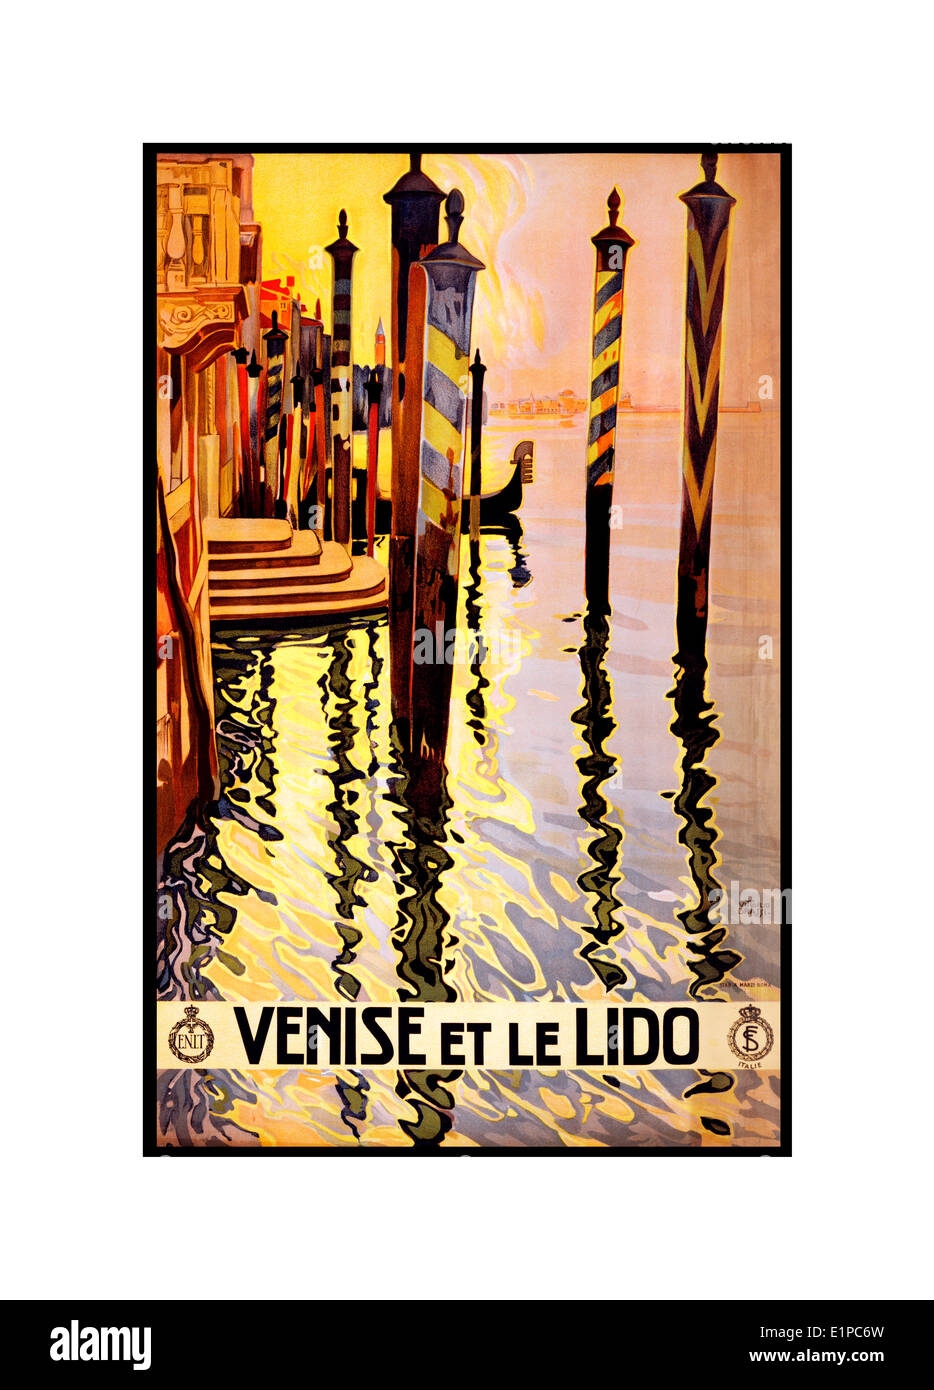 1920's evocative vintage travel poster for Venice Lido Italy Stock Photo